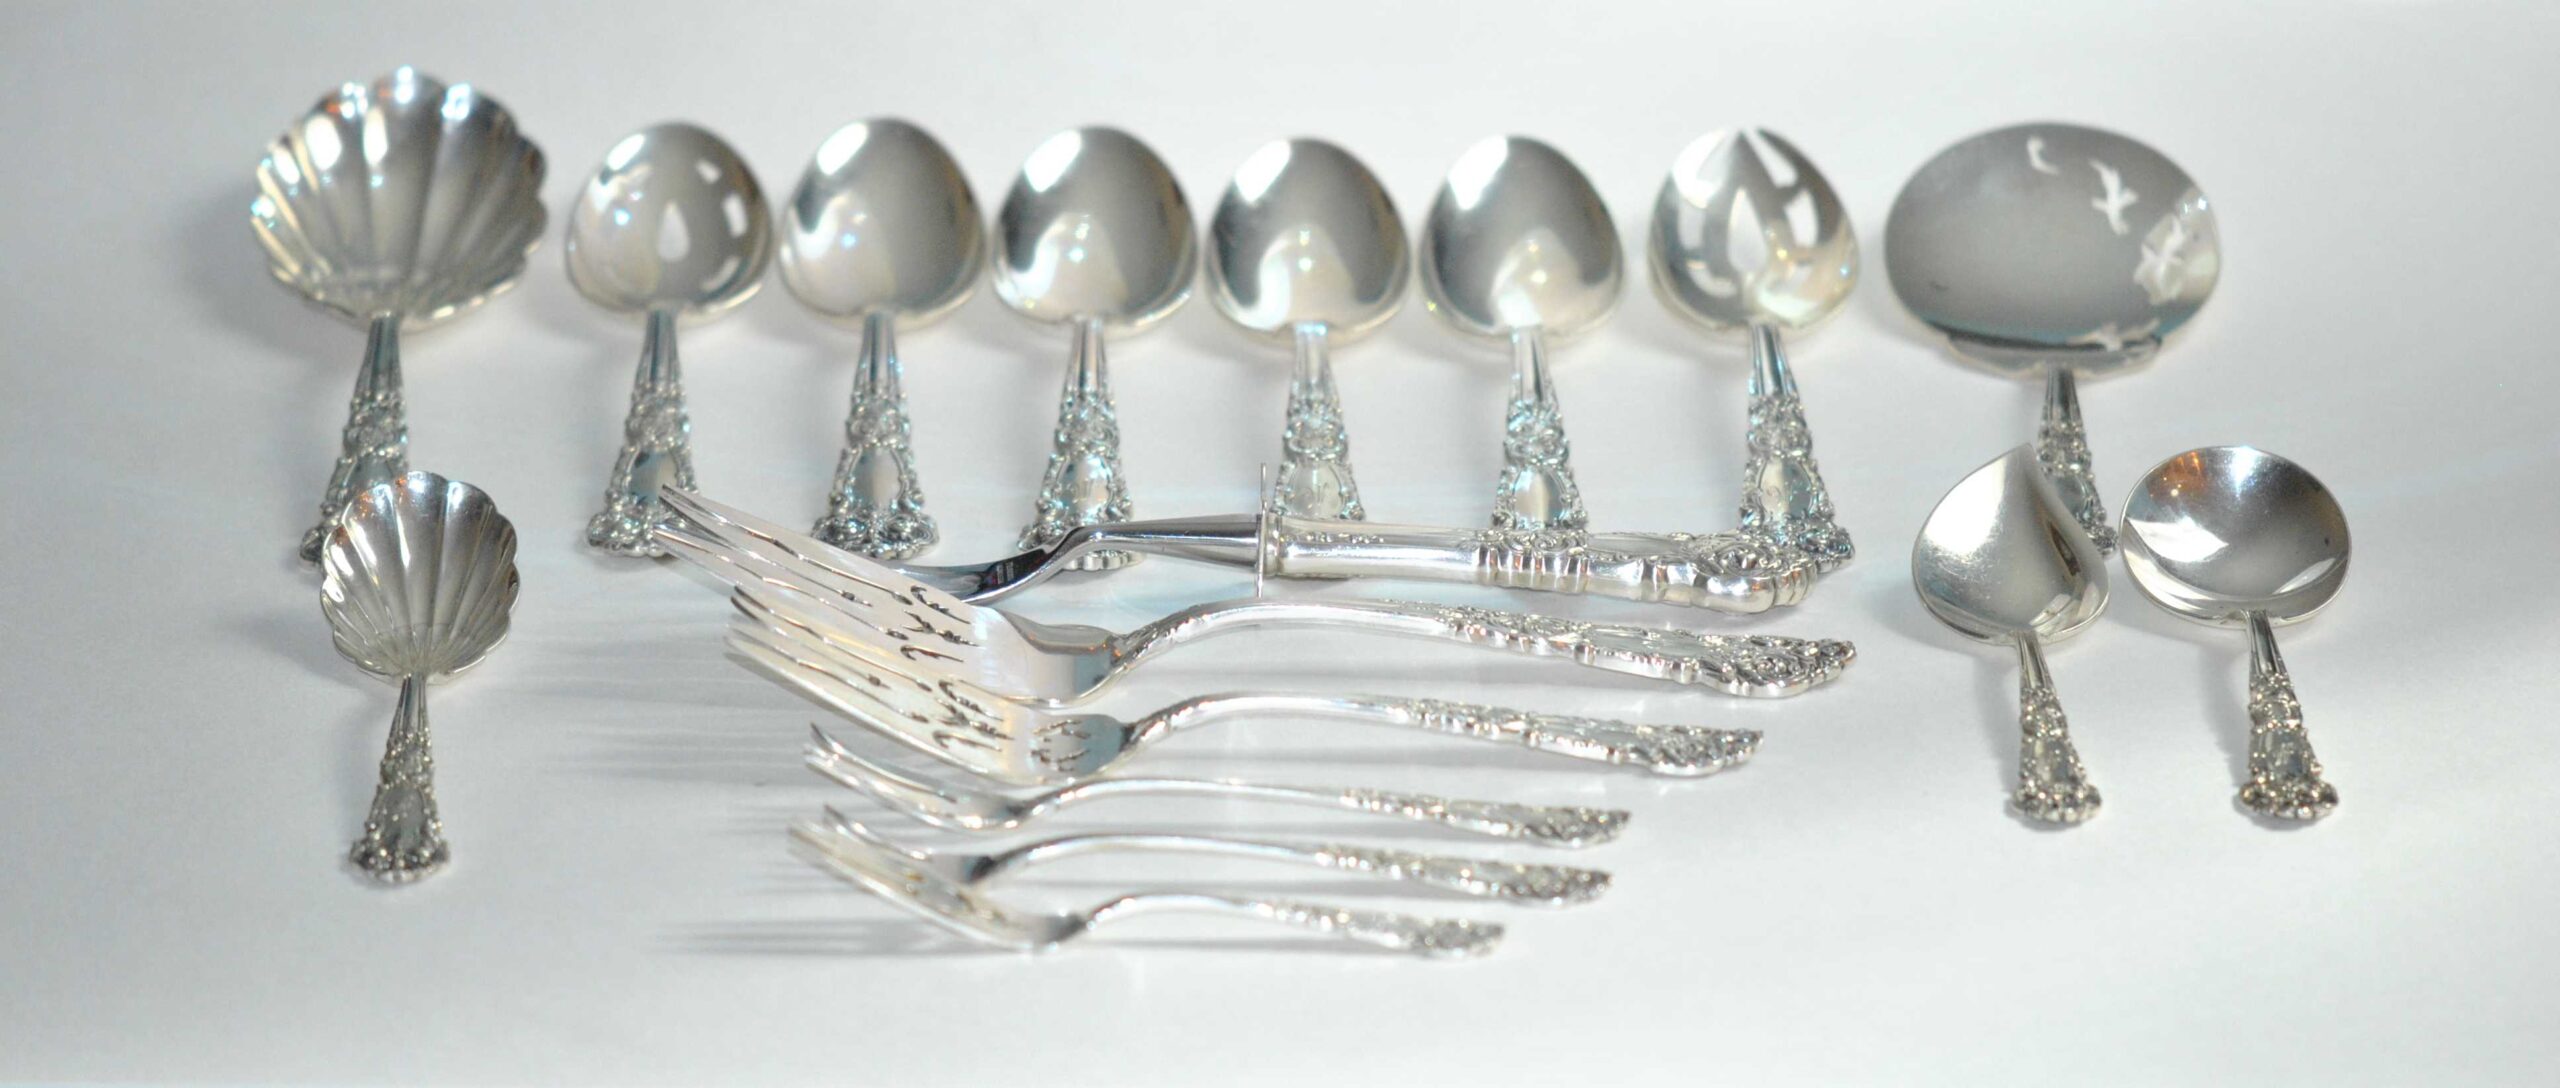 Reed & Barton French Renaissance Flatware And Serving Pieces